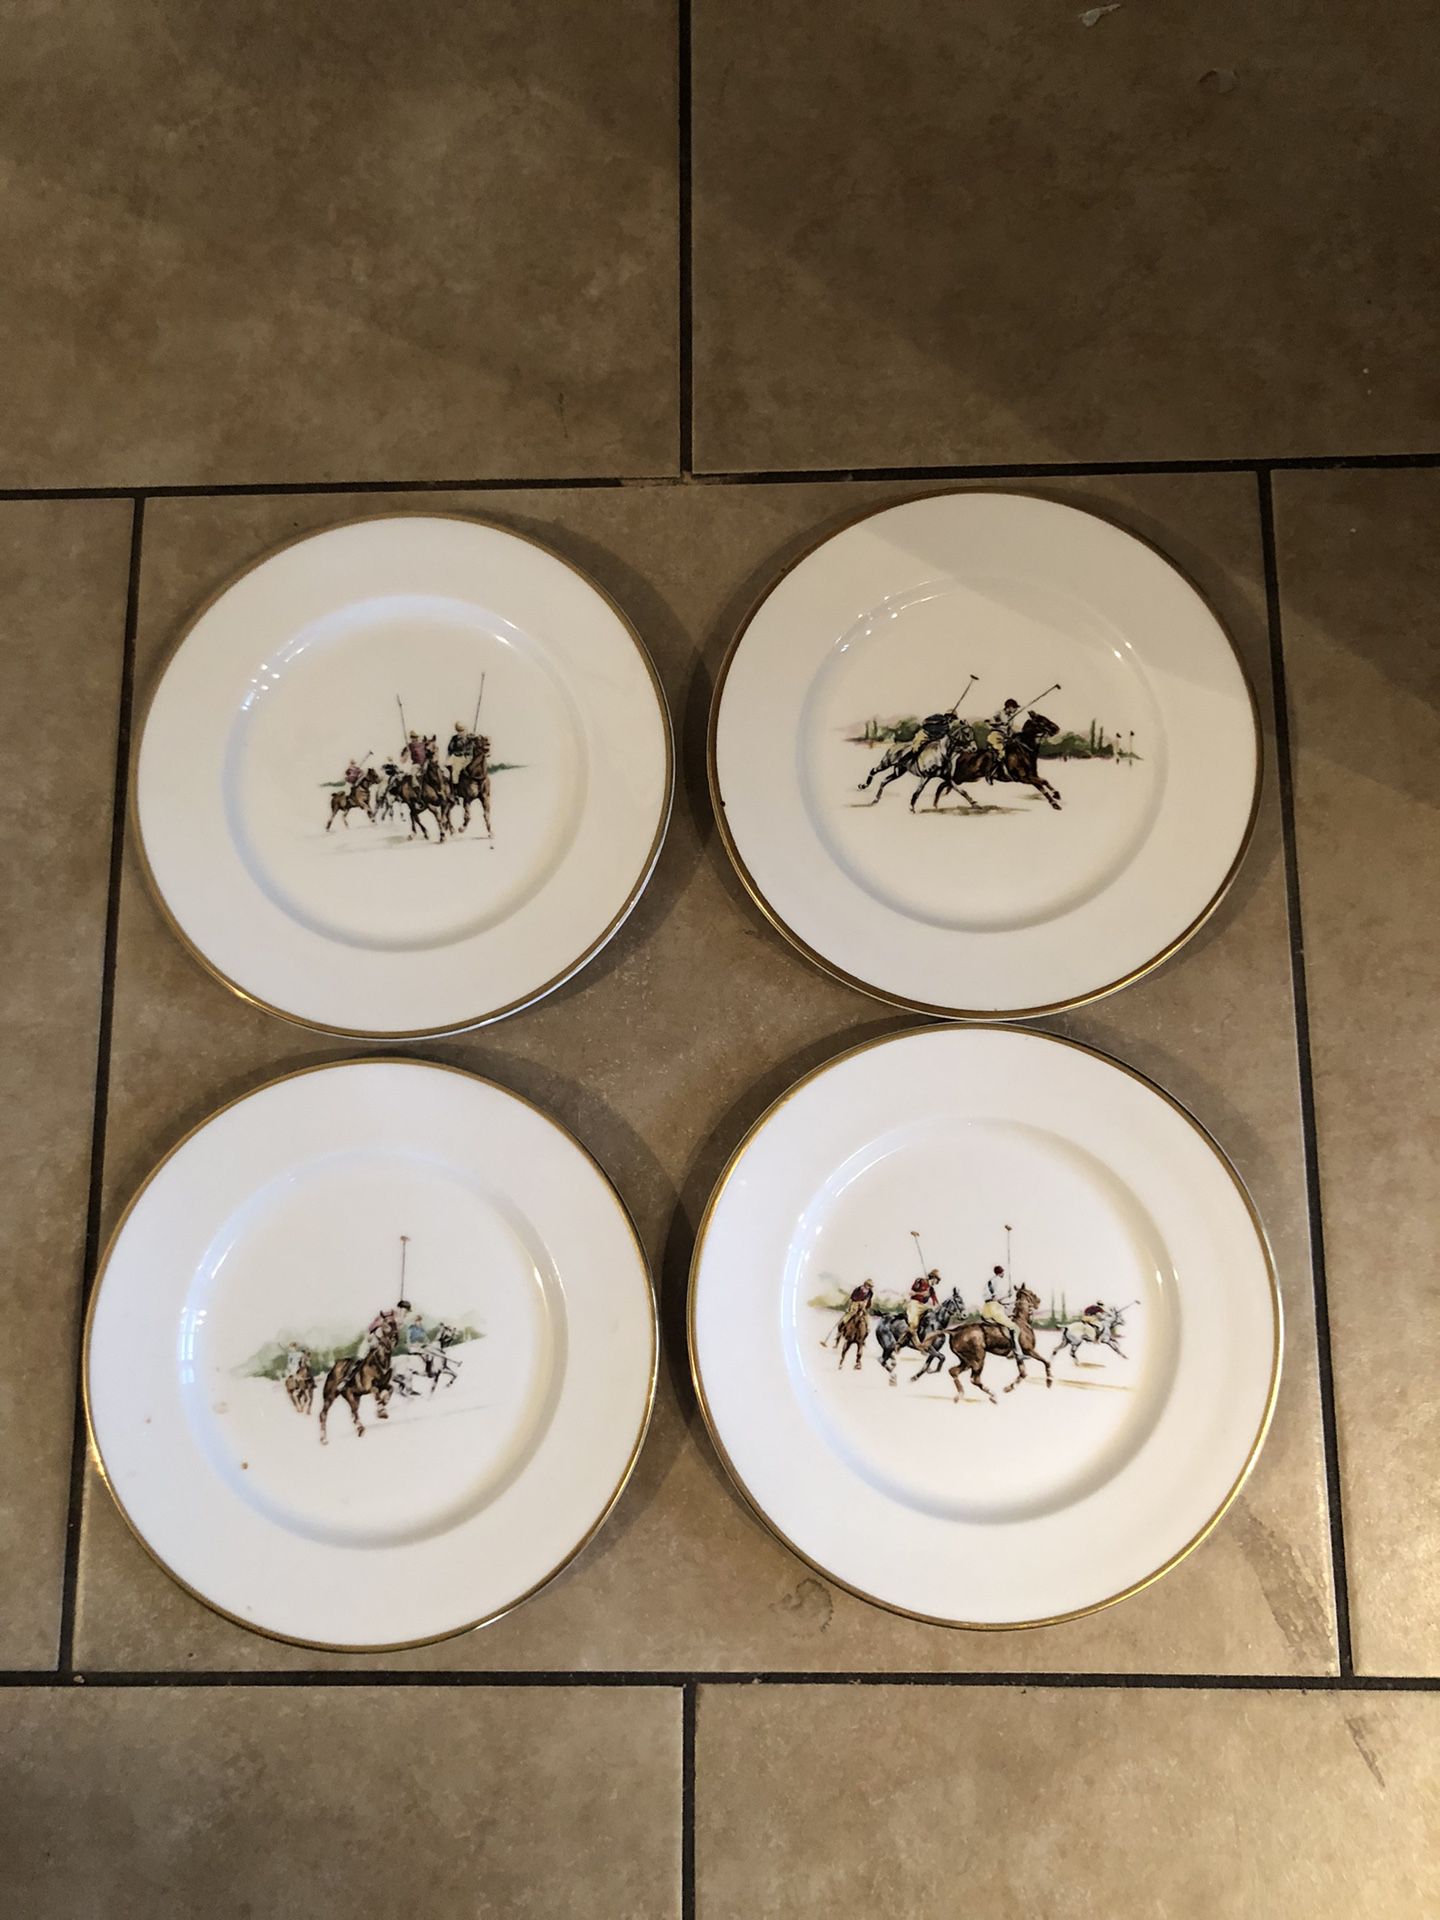 Ralph Lauren “Polo Scene” Bone China Salad And Dinner Plates Set Of 4 Gold Trim England Sport Of Kings, Equestrian Collector Plates